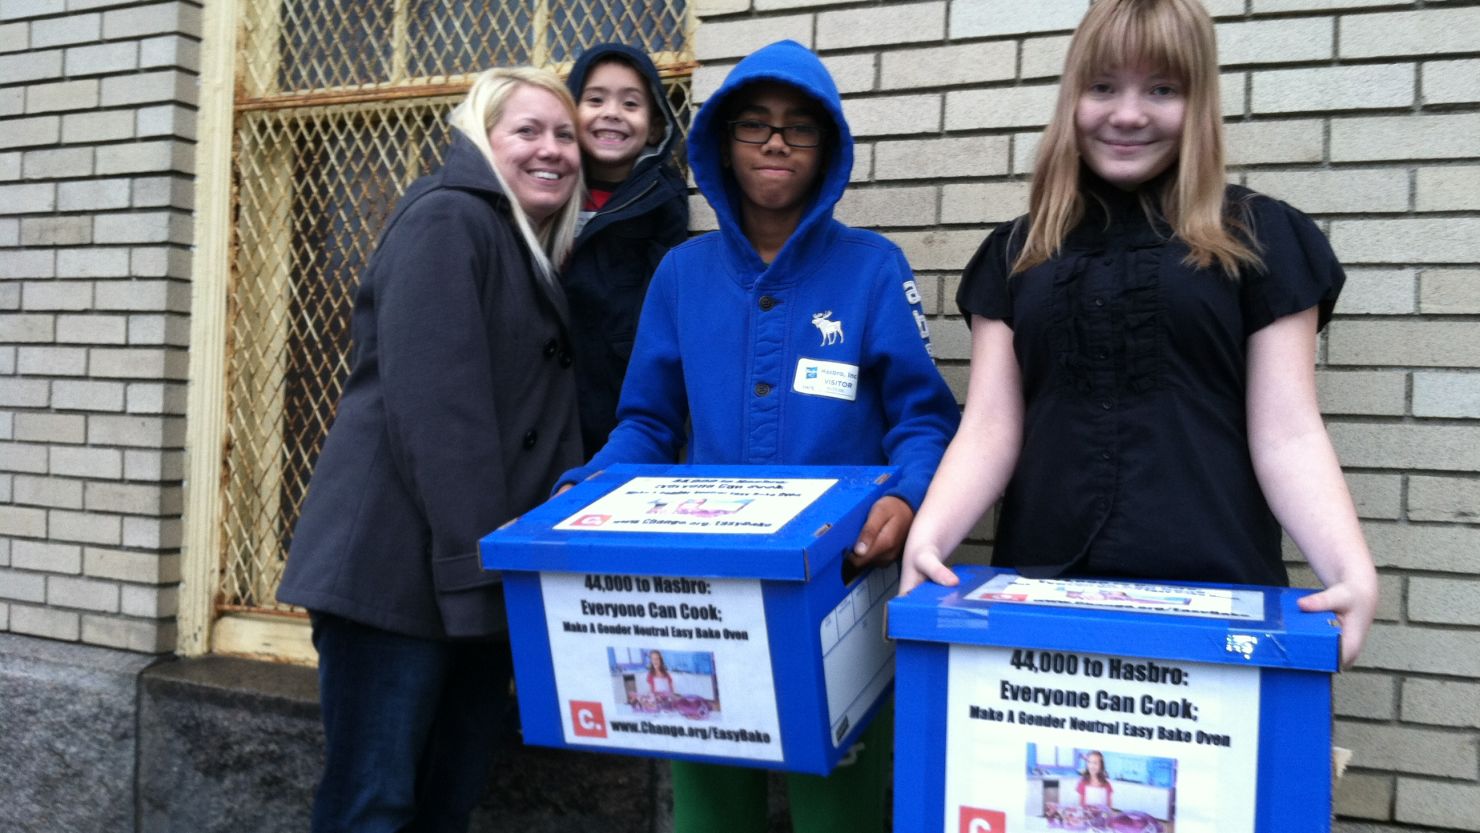 McKenna Pope (right) delivers petition signatures to Hasbro's headquarters in Pawtucket, Rhode Island, with mother Erica Boscio and brothers Gavyn and Matthew Boscio (left to right).